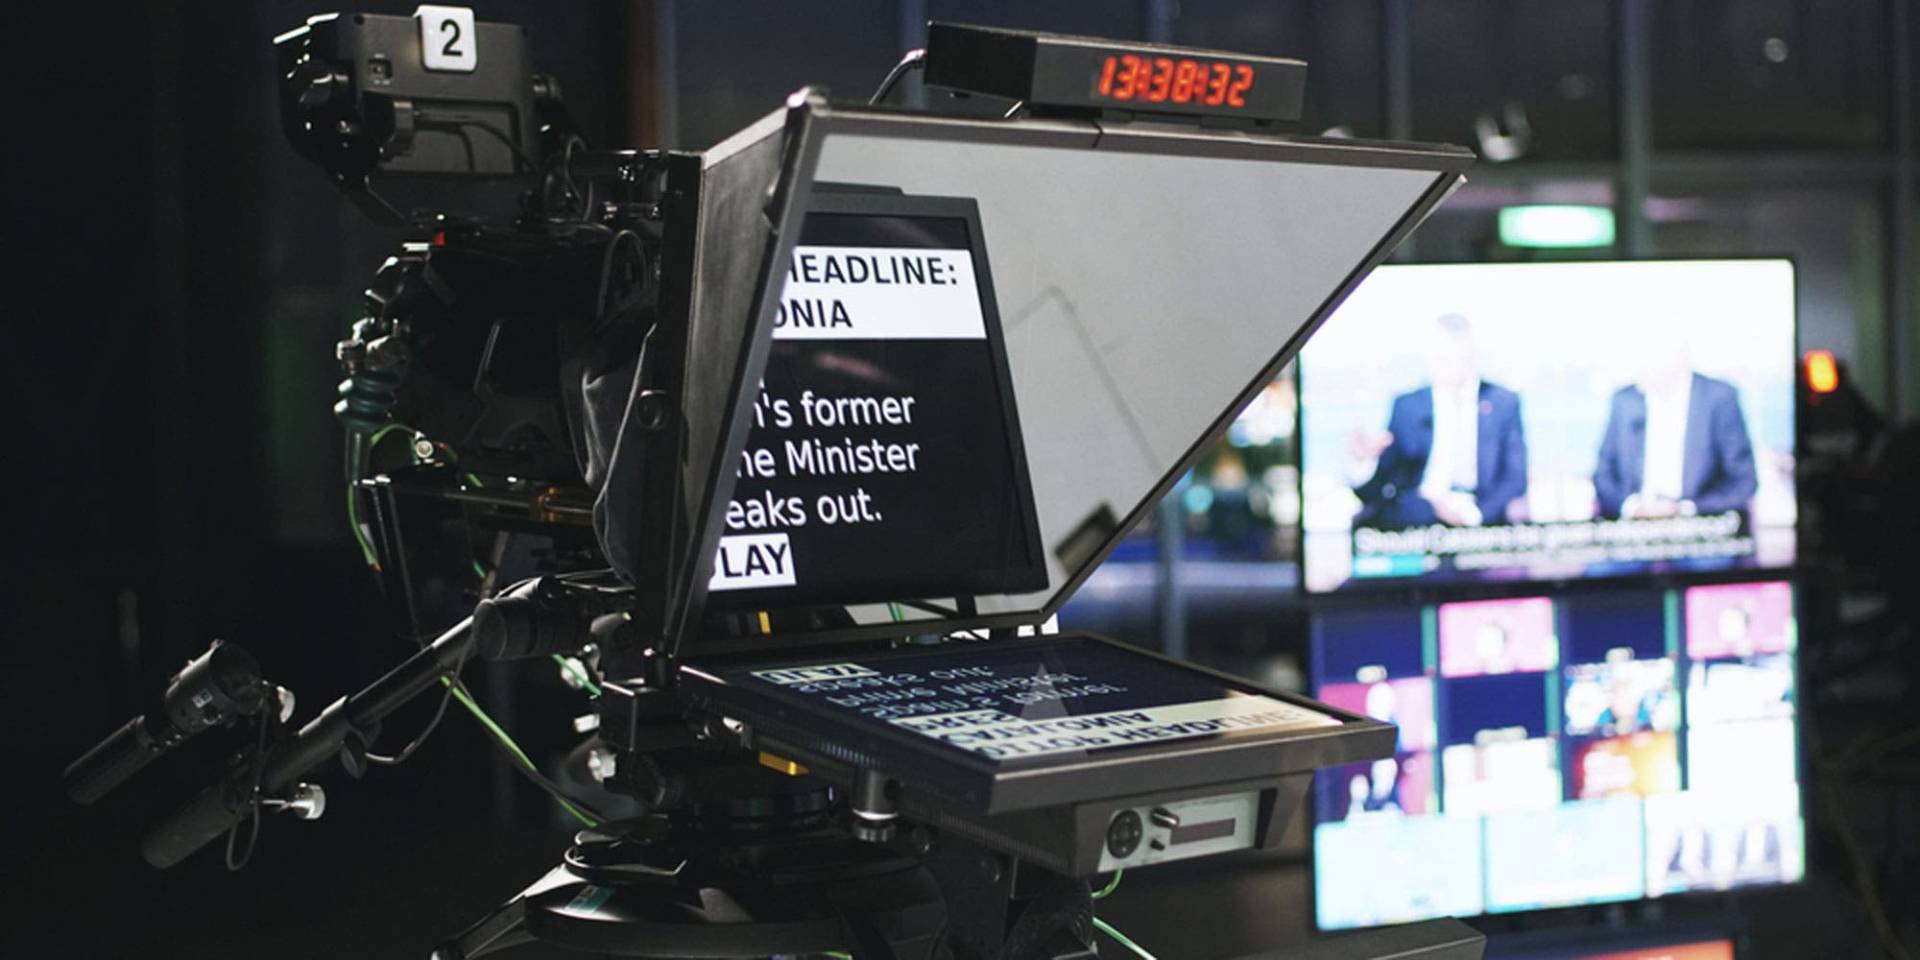 Simple Teleprompter - See How to Download